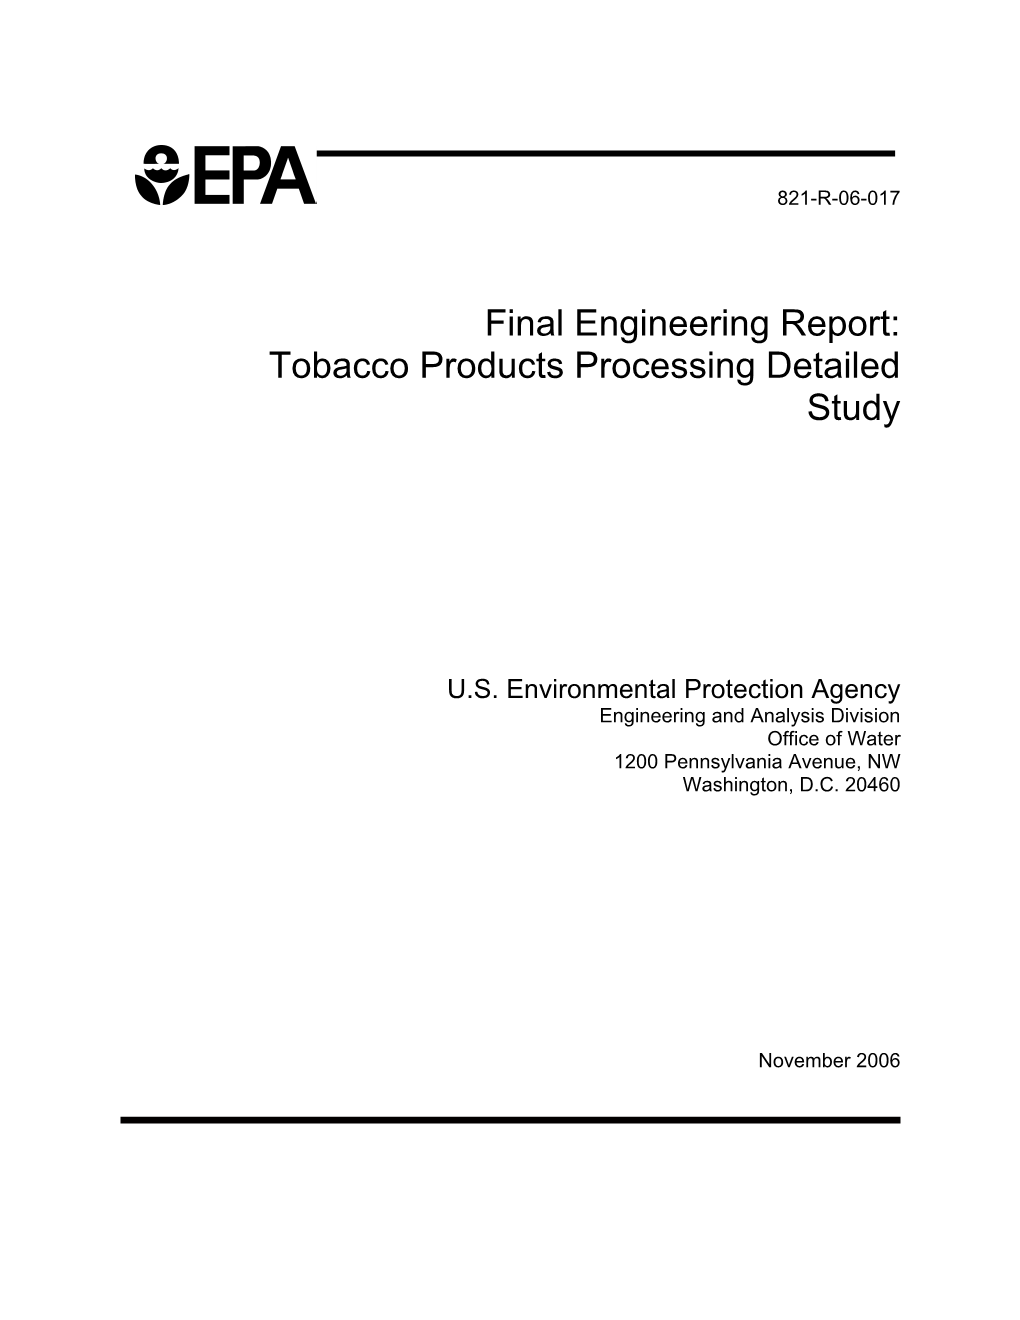 Final Engineering Report: Tobacco Products Processing Detailed Study